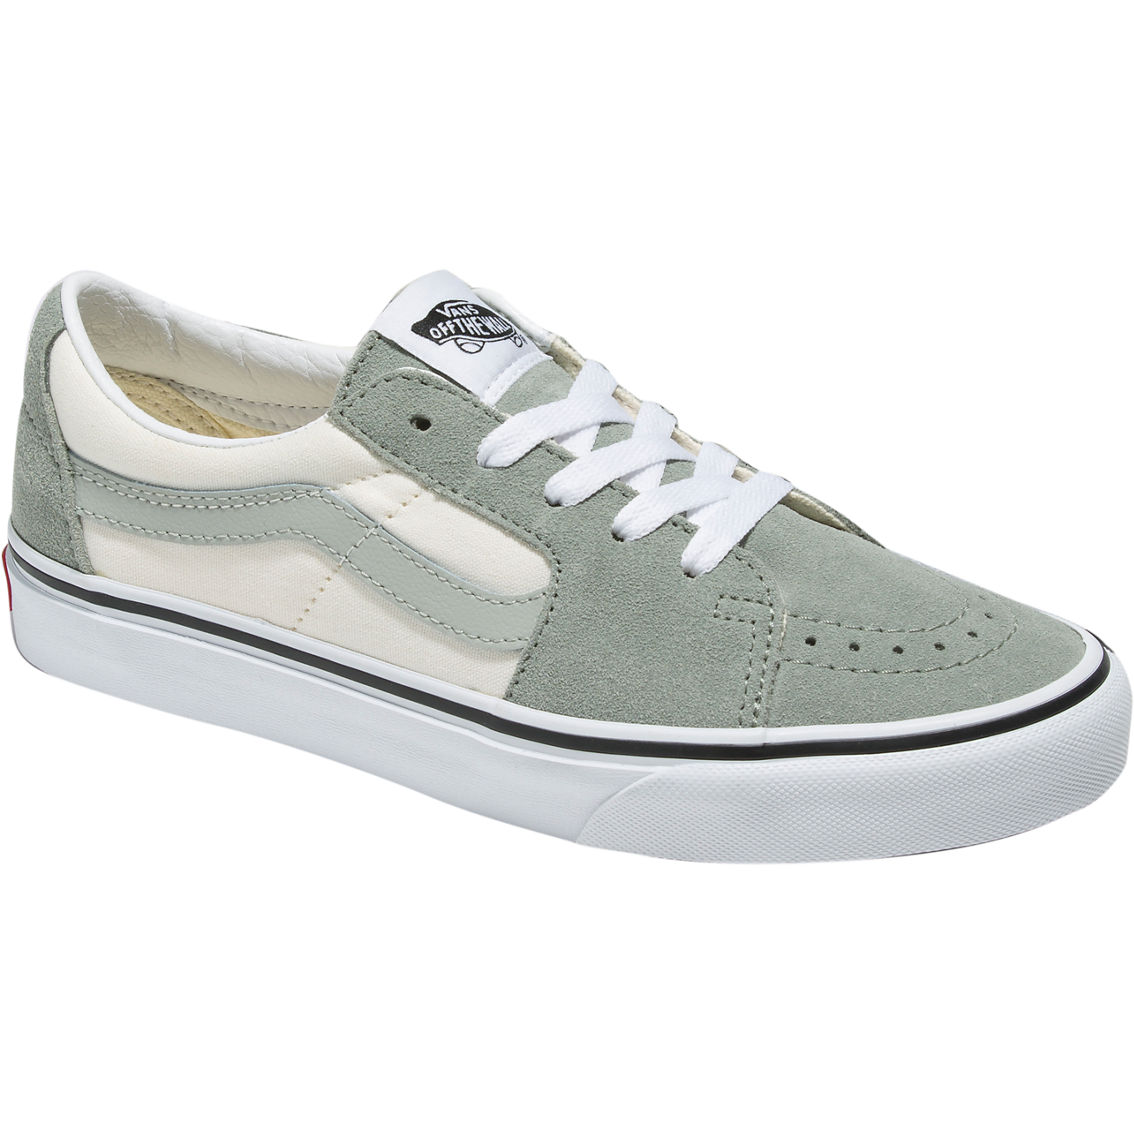 Vans SK8 Low 2 Tone Shadow Shoes - Image 1 of 4